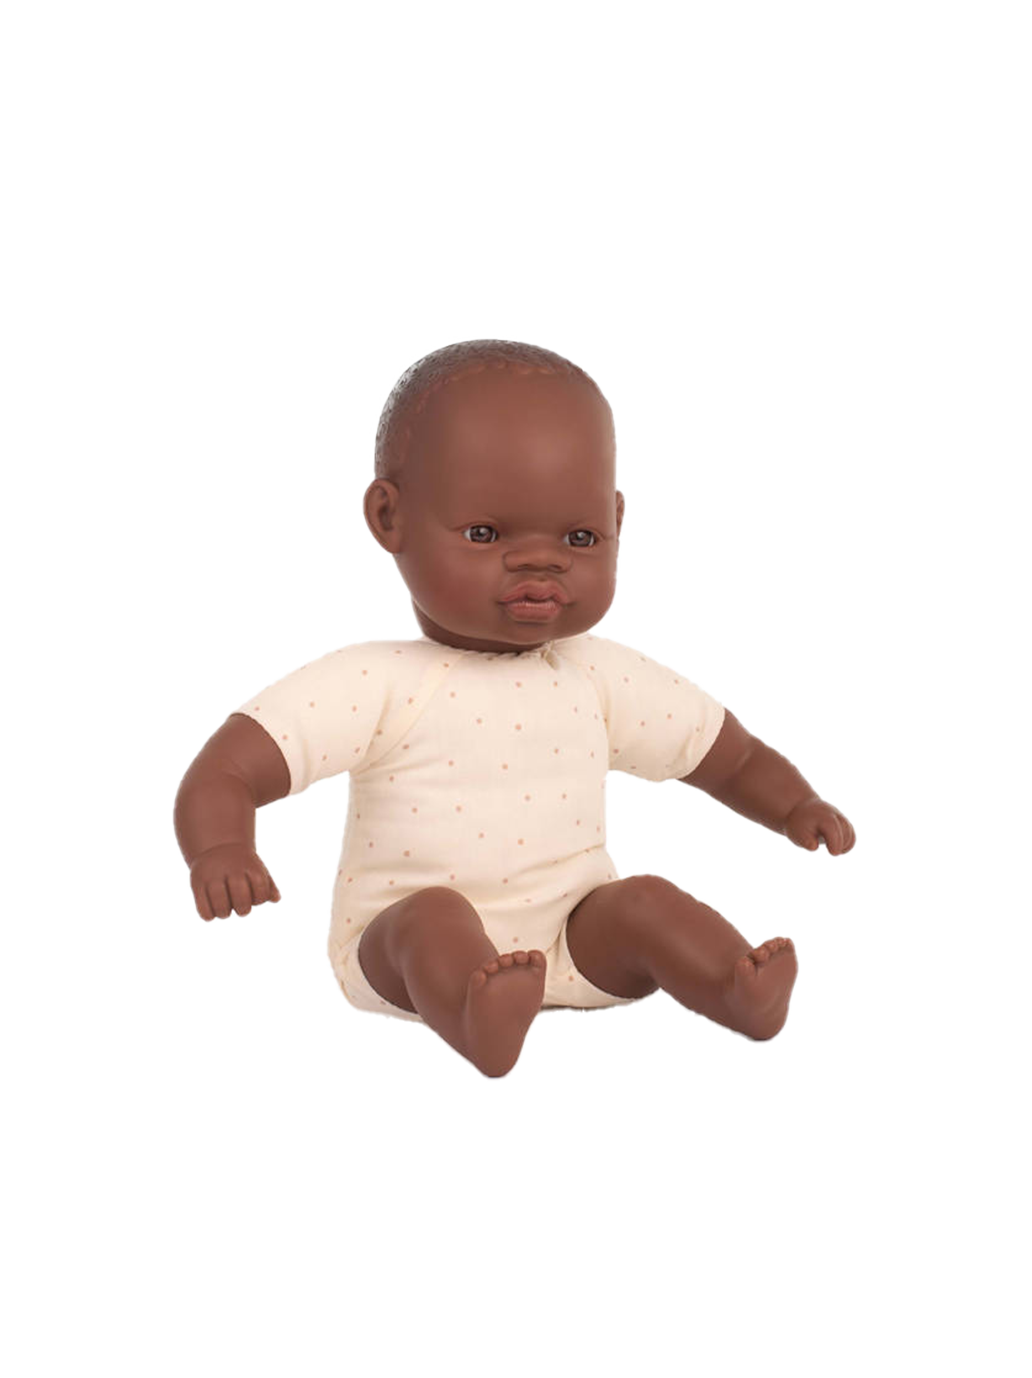 A doll with a soft belly